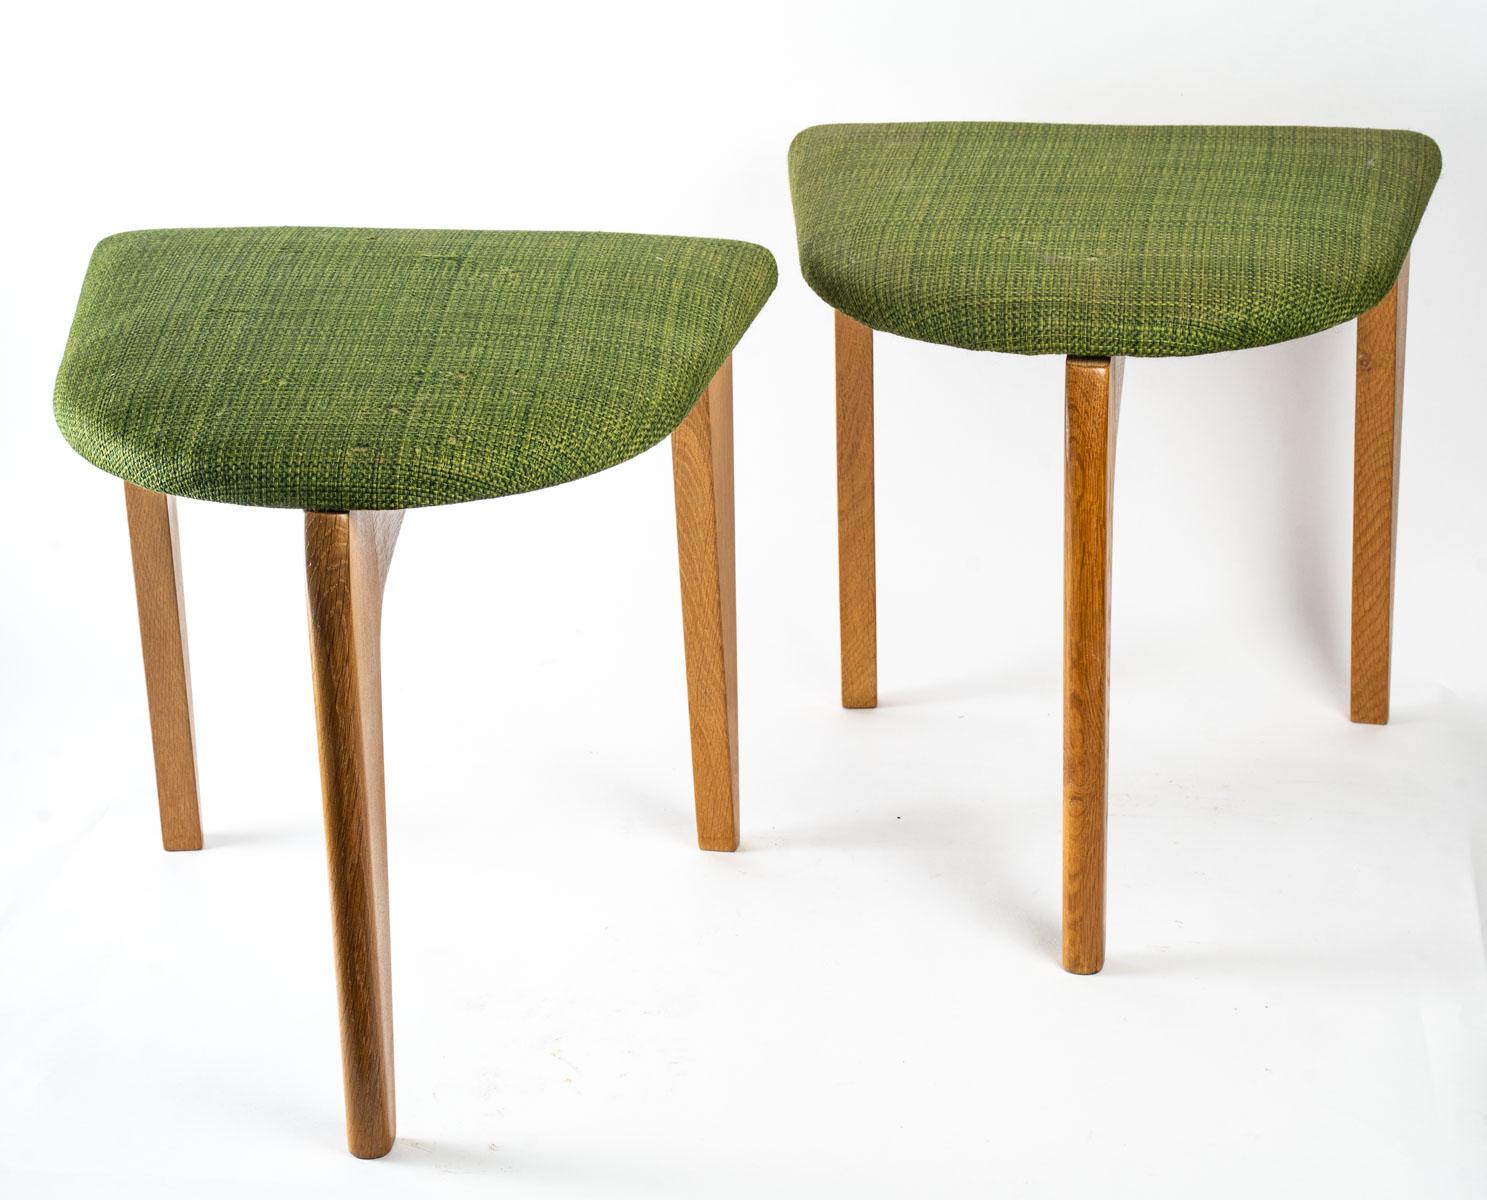 Pair of stools by Guillerme and Chambon, design from the 60's, period tapestry.
Measures: H 47 cm, W 46 cm, D 46 cm.